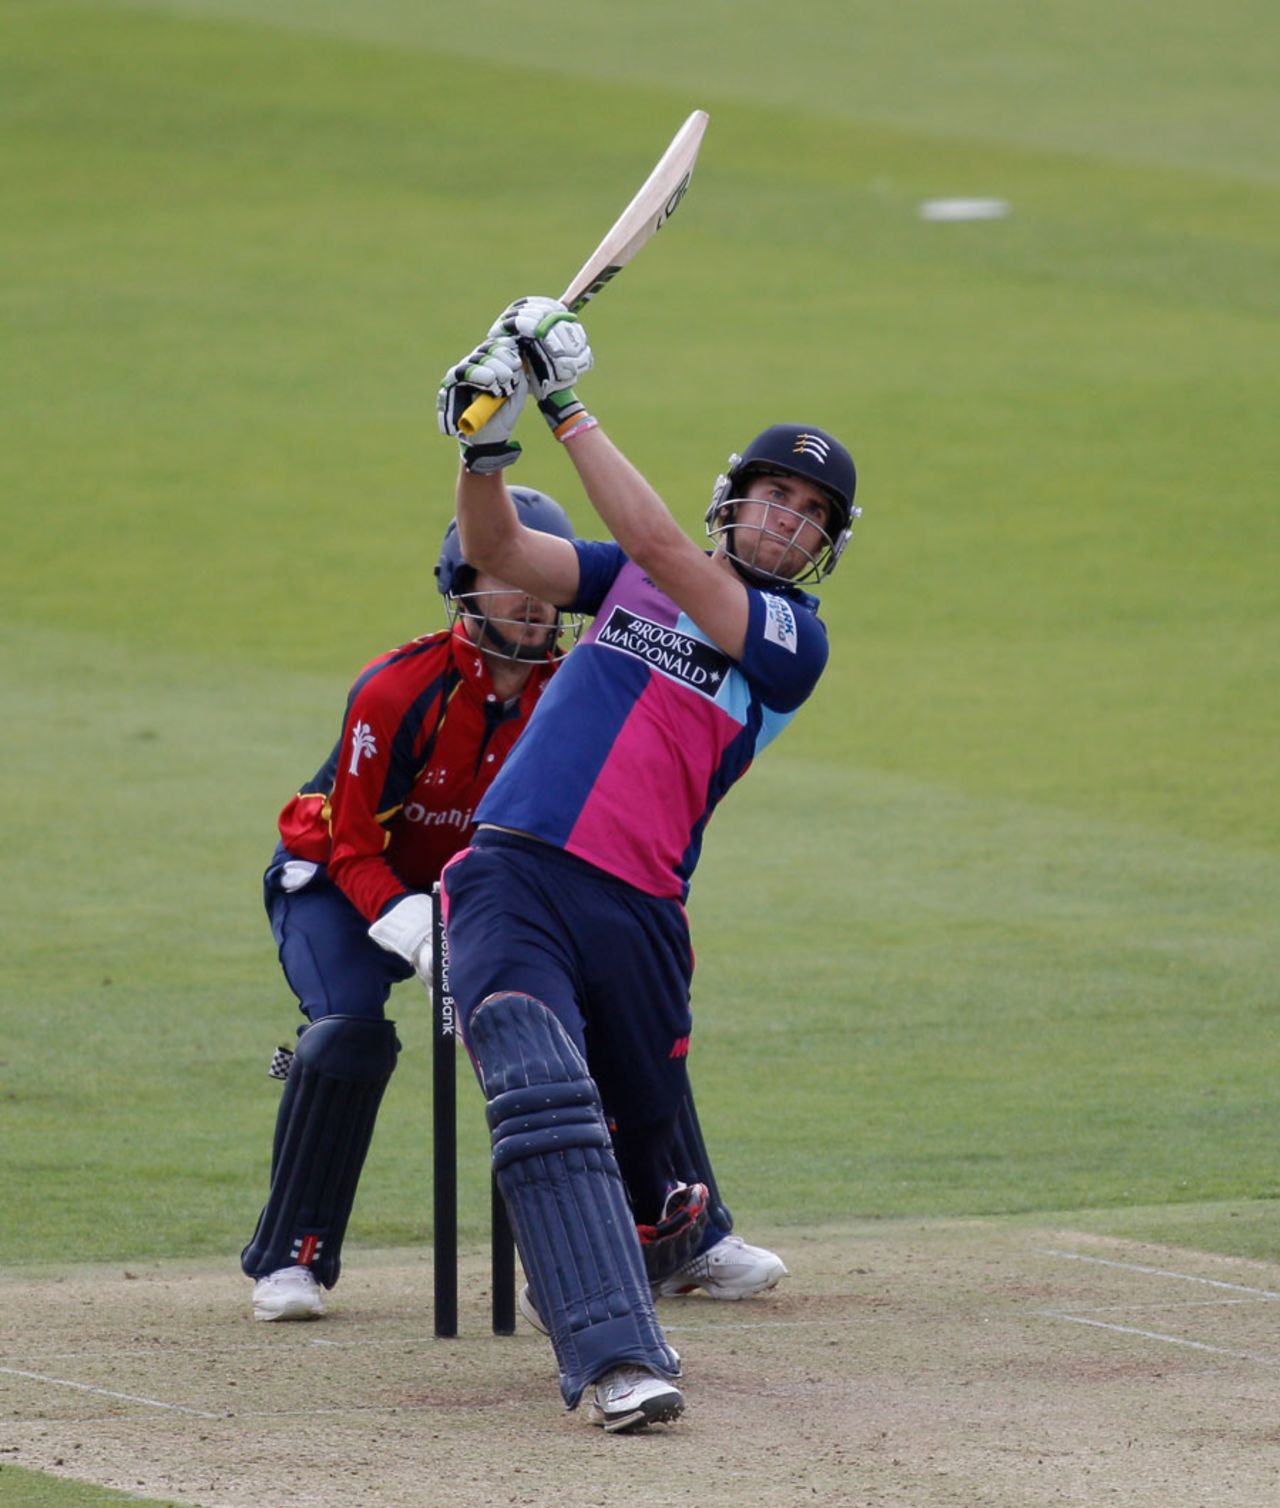 Dawid Malan smashed 134 from 108 balls, Middlesex v Essex, CB40 Group A, Lord's, August 27, 2012